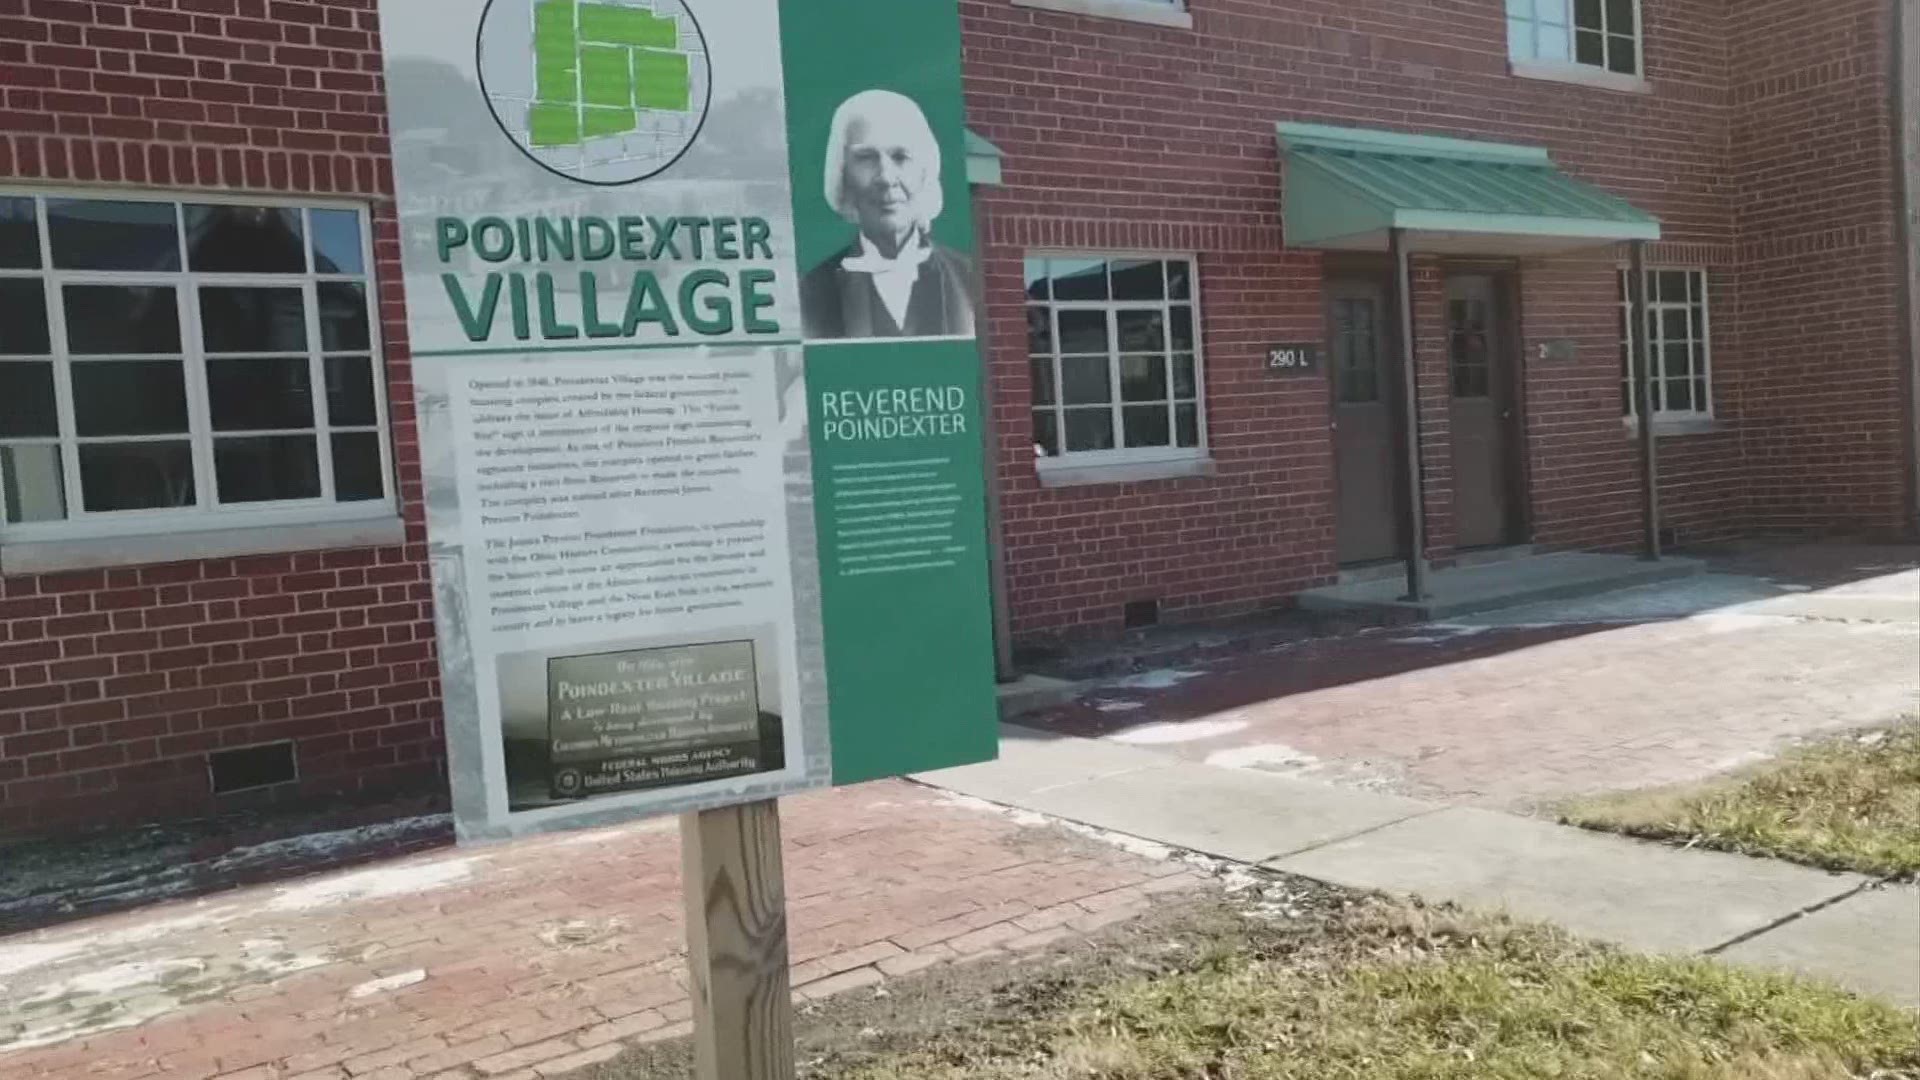 Poindexter Village was one of the first public housing projects in the United States.